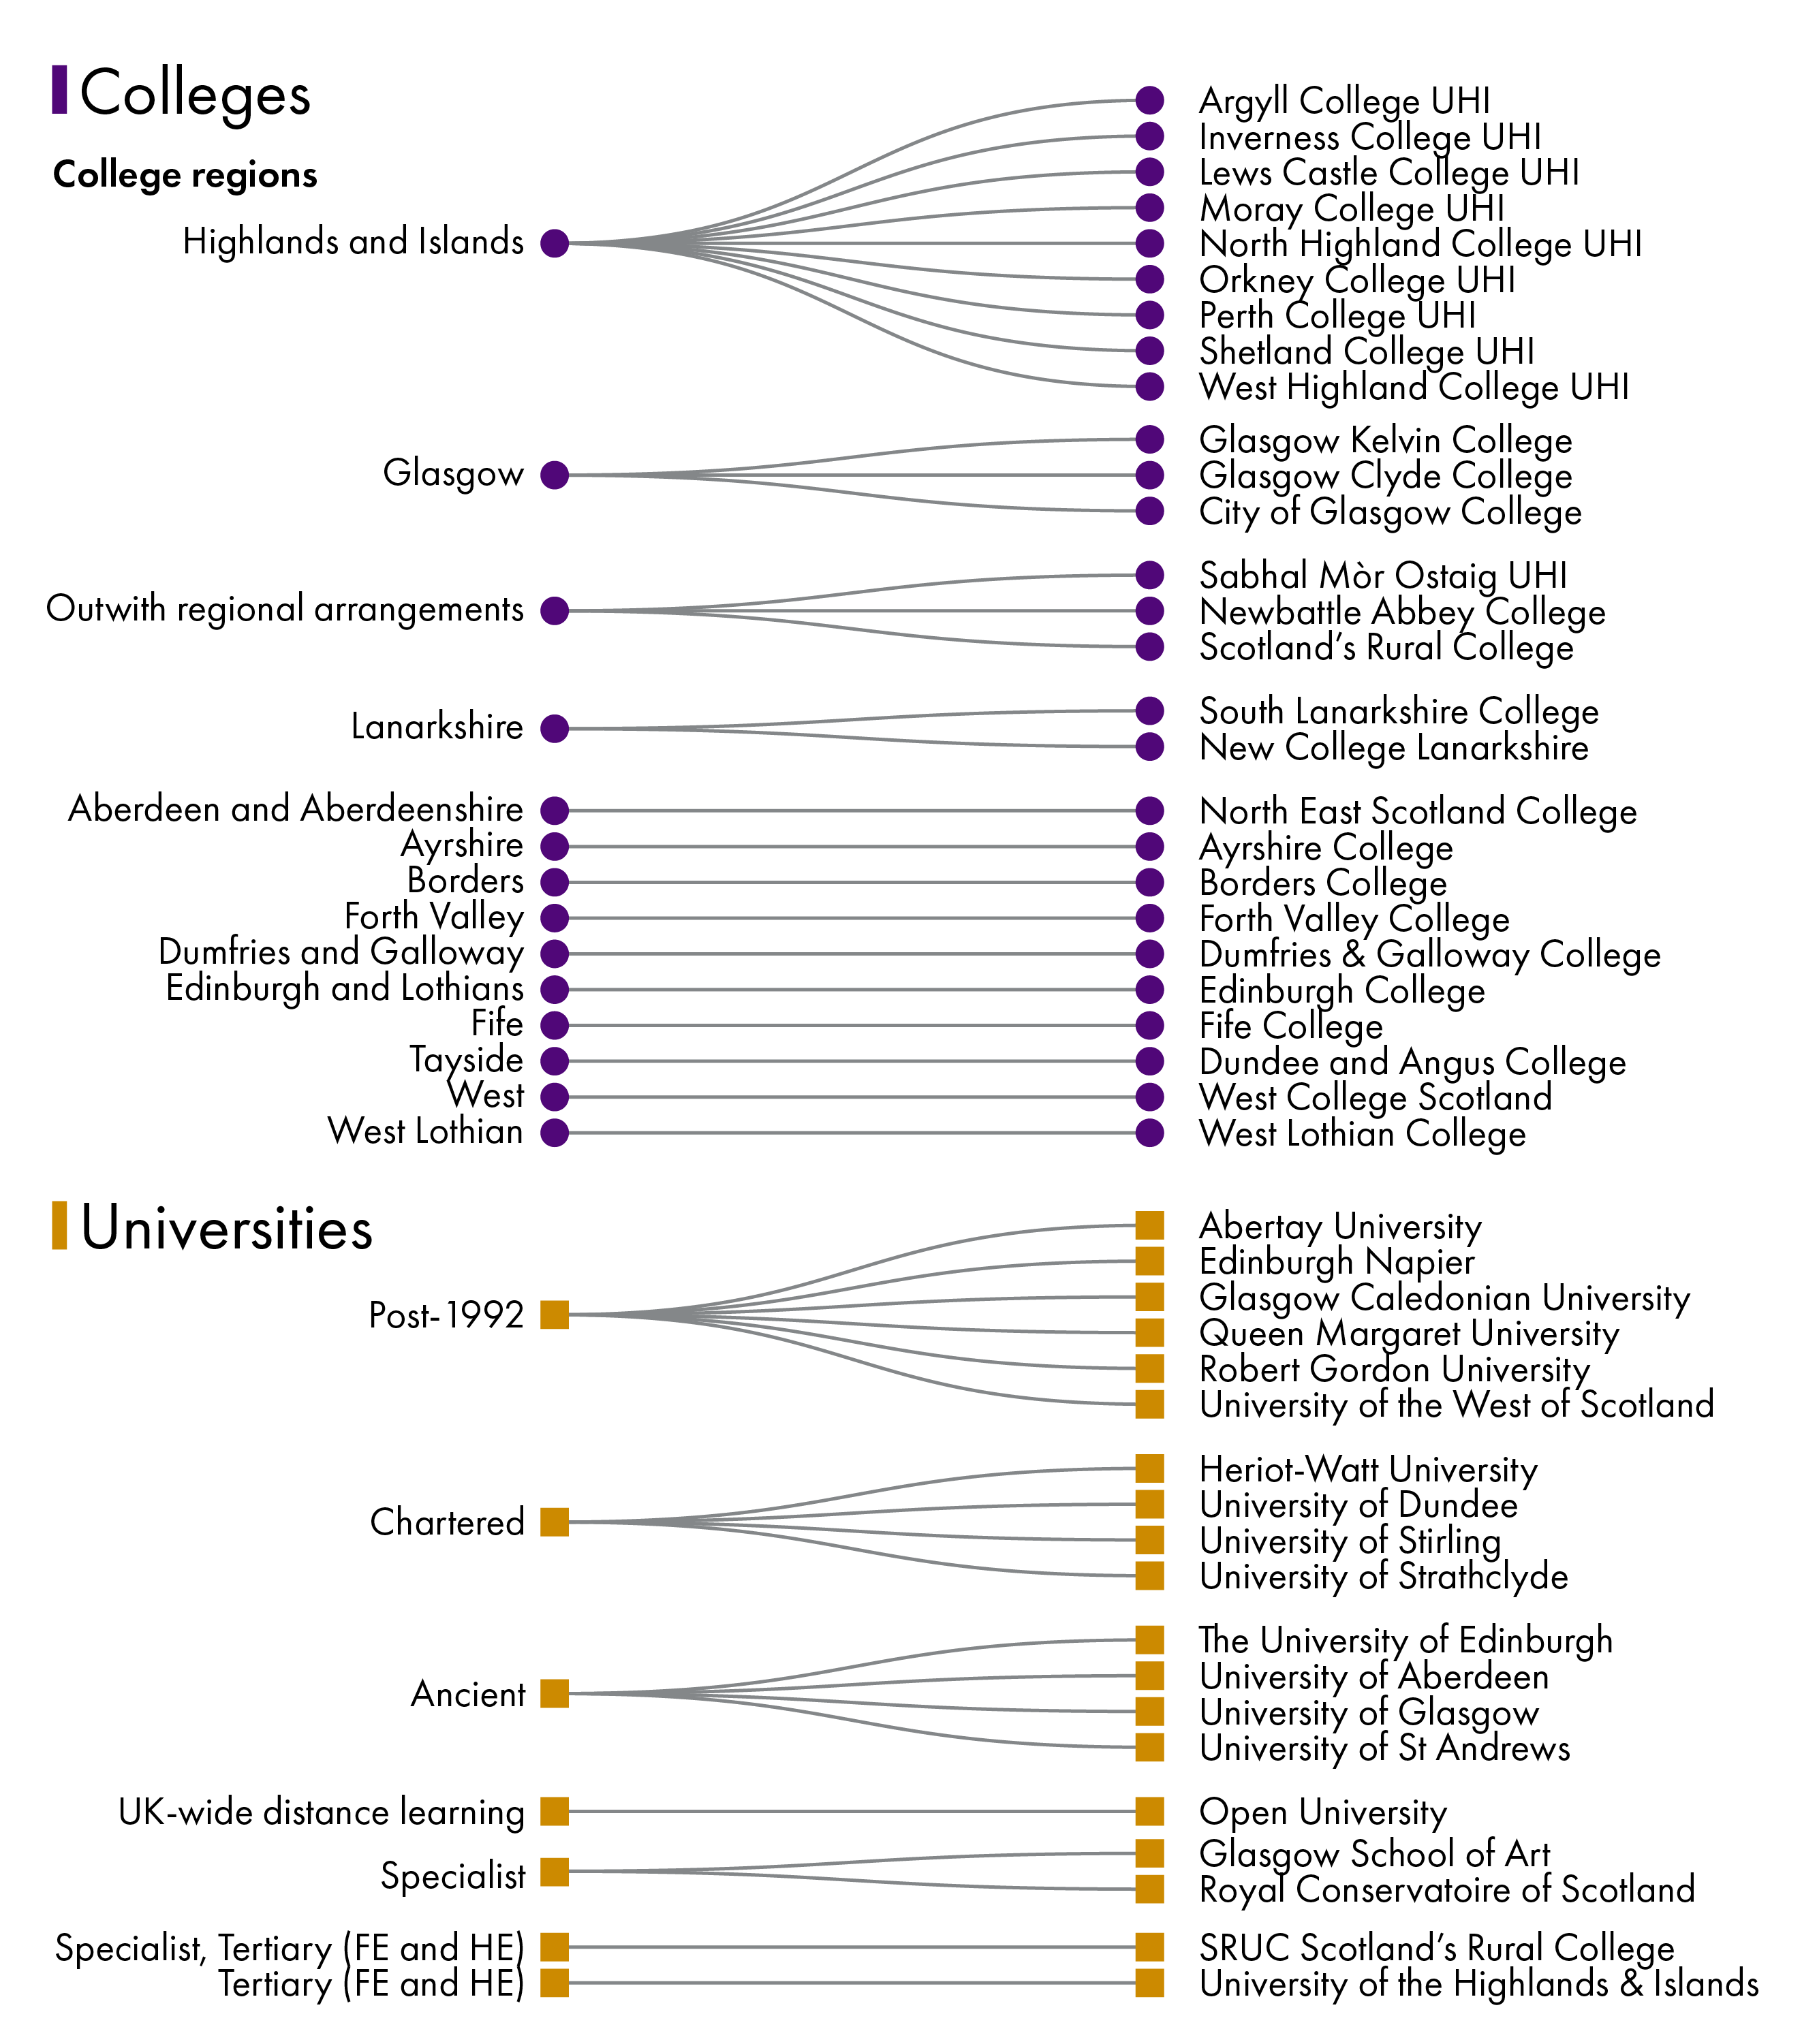 Colleges are organised into 13 regions and there are 19 universities in Scotland.